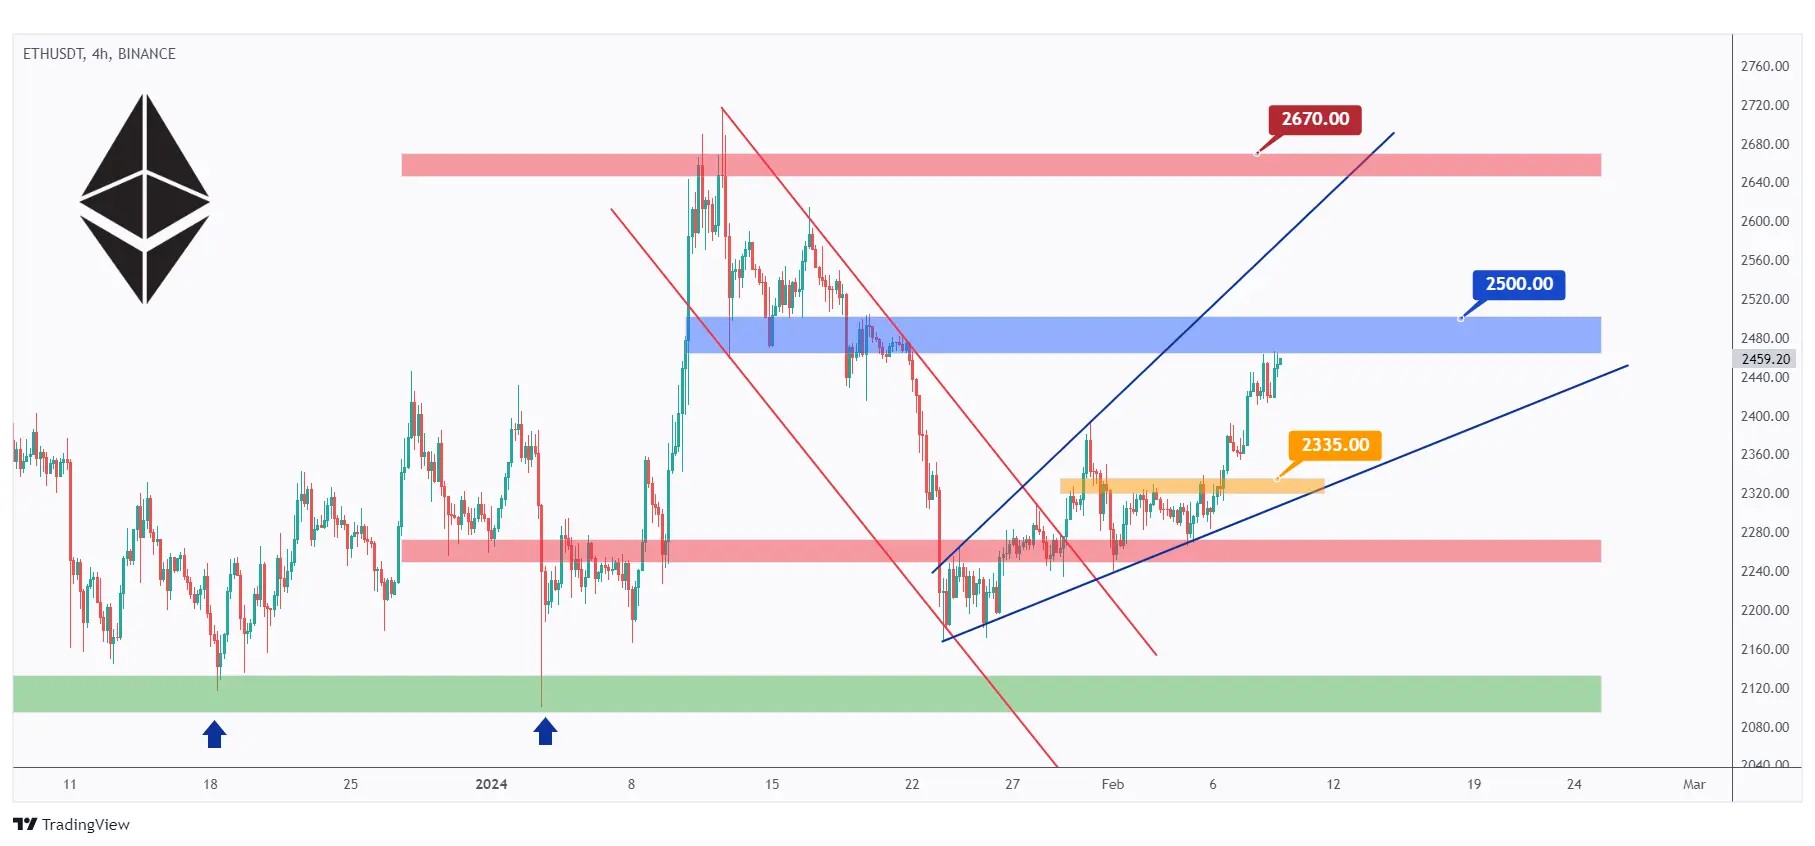 ETH 4h chart overall bullish trading inside a rising broadening wedge pattern and facing a the $2500 round number.